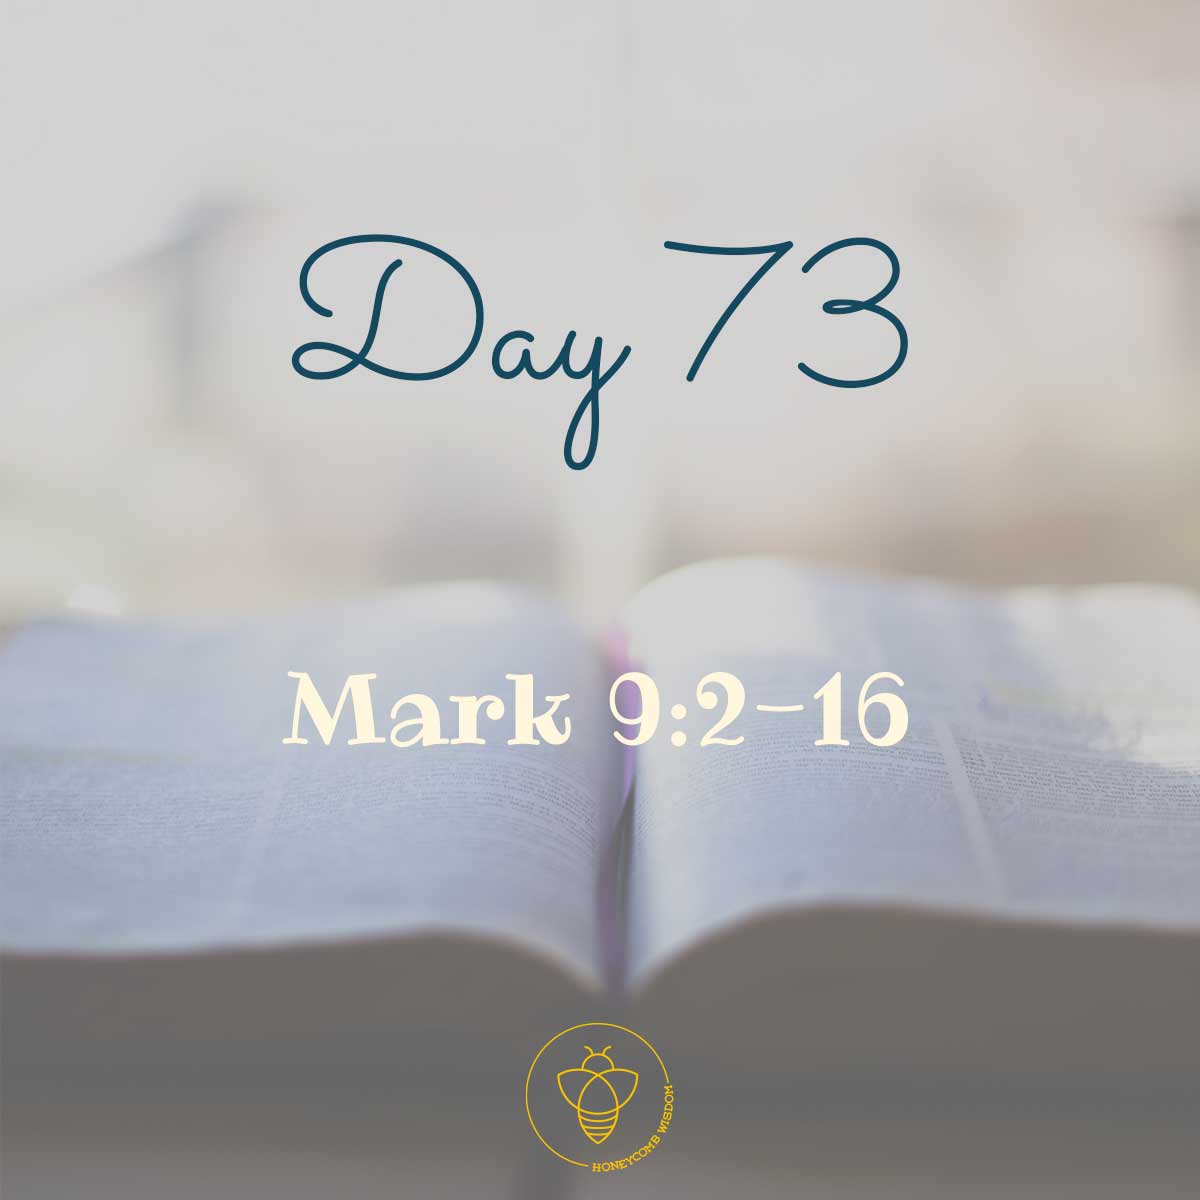 Day 73: Mark 9:2 to 16